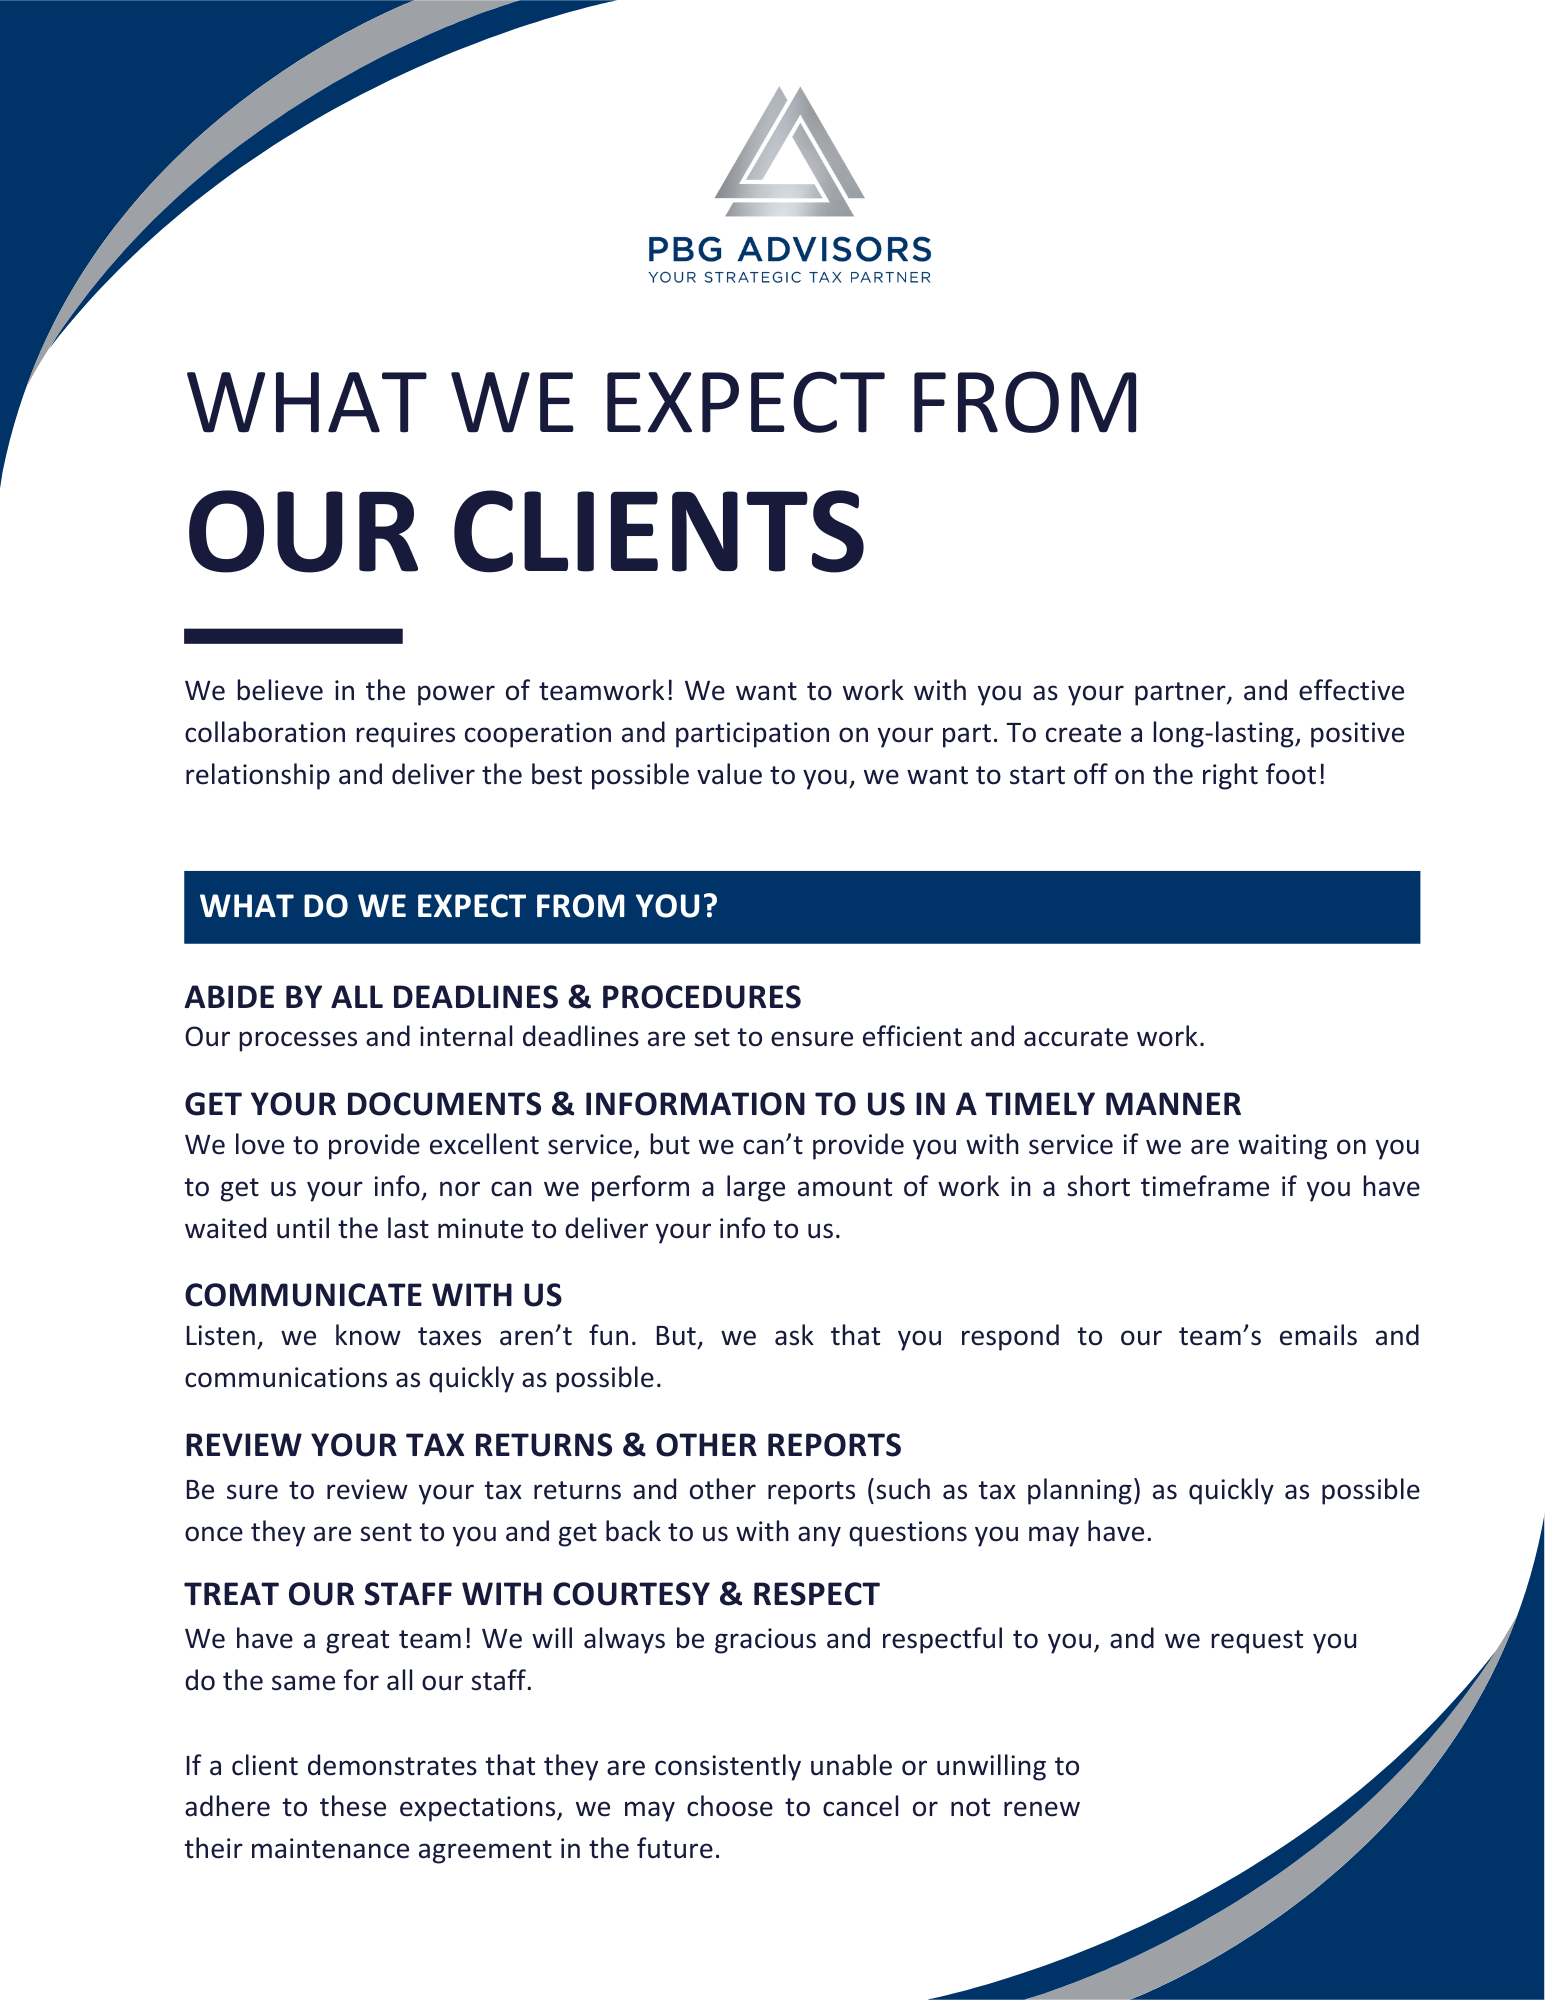 What we expect from our clients at PBG Advisors